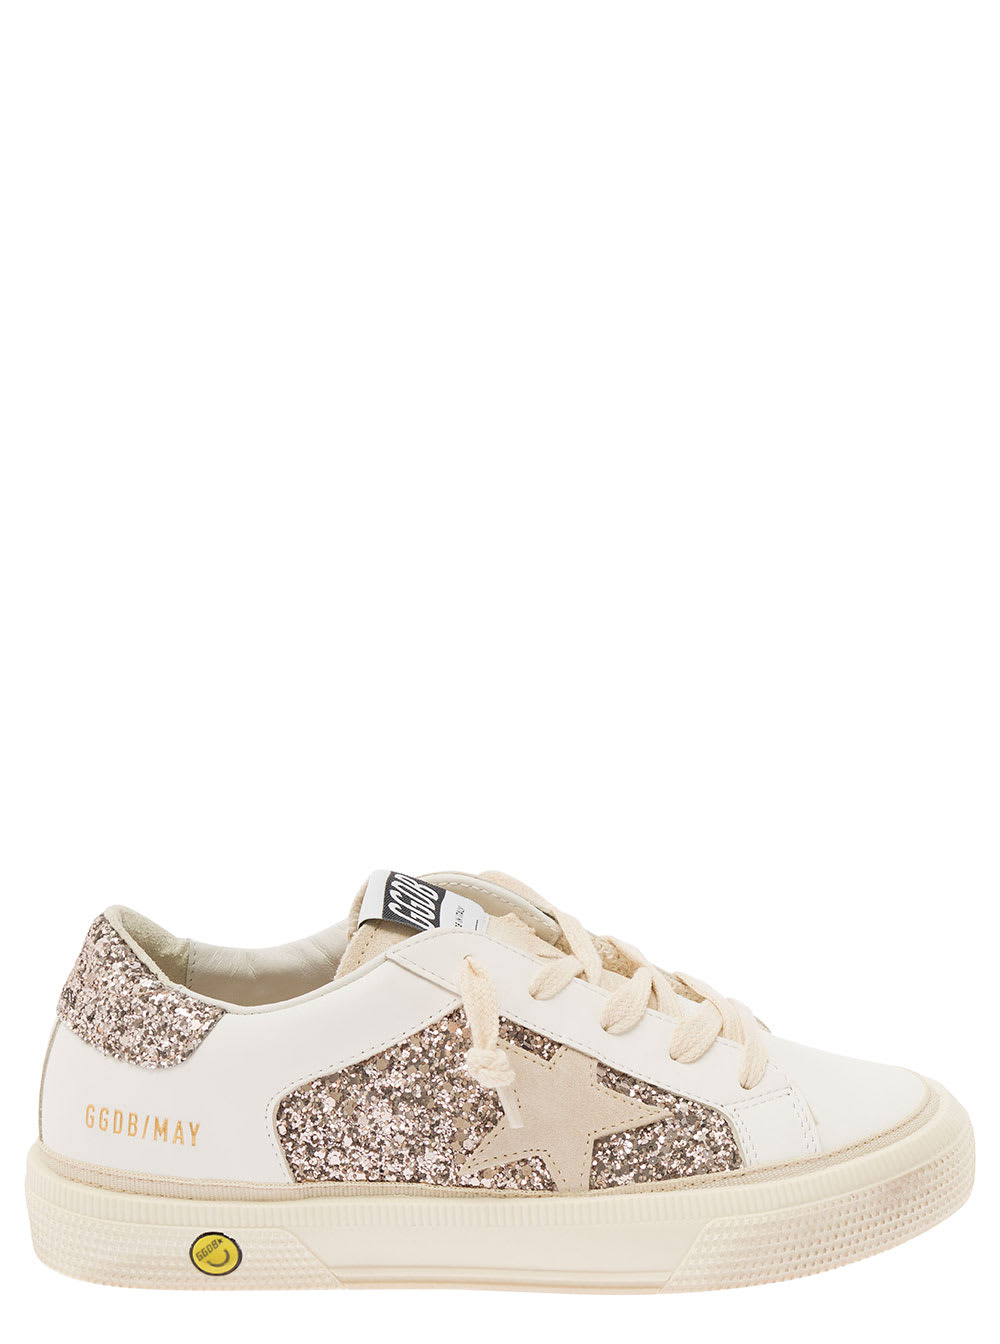 Shop Golden Goose White Low Top Sneakers With Star And Glitter Embellishment In Leather Blend Girl